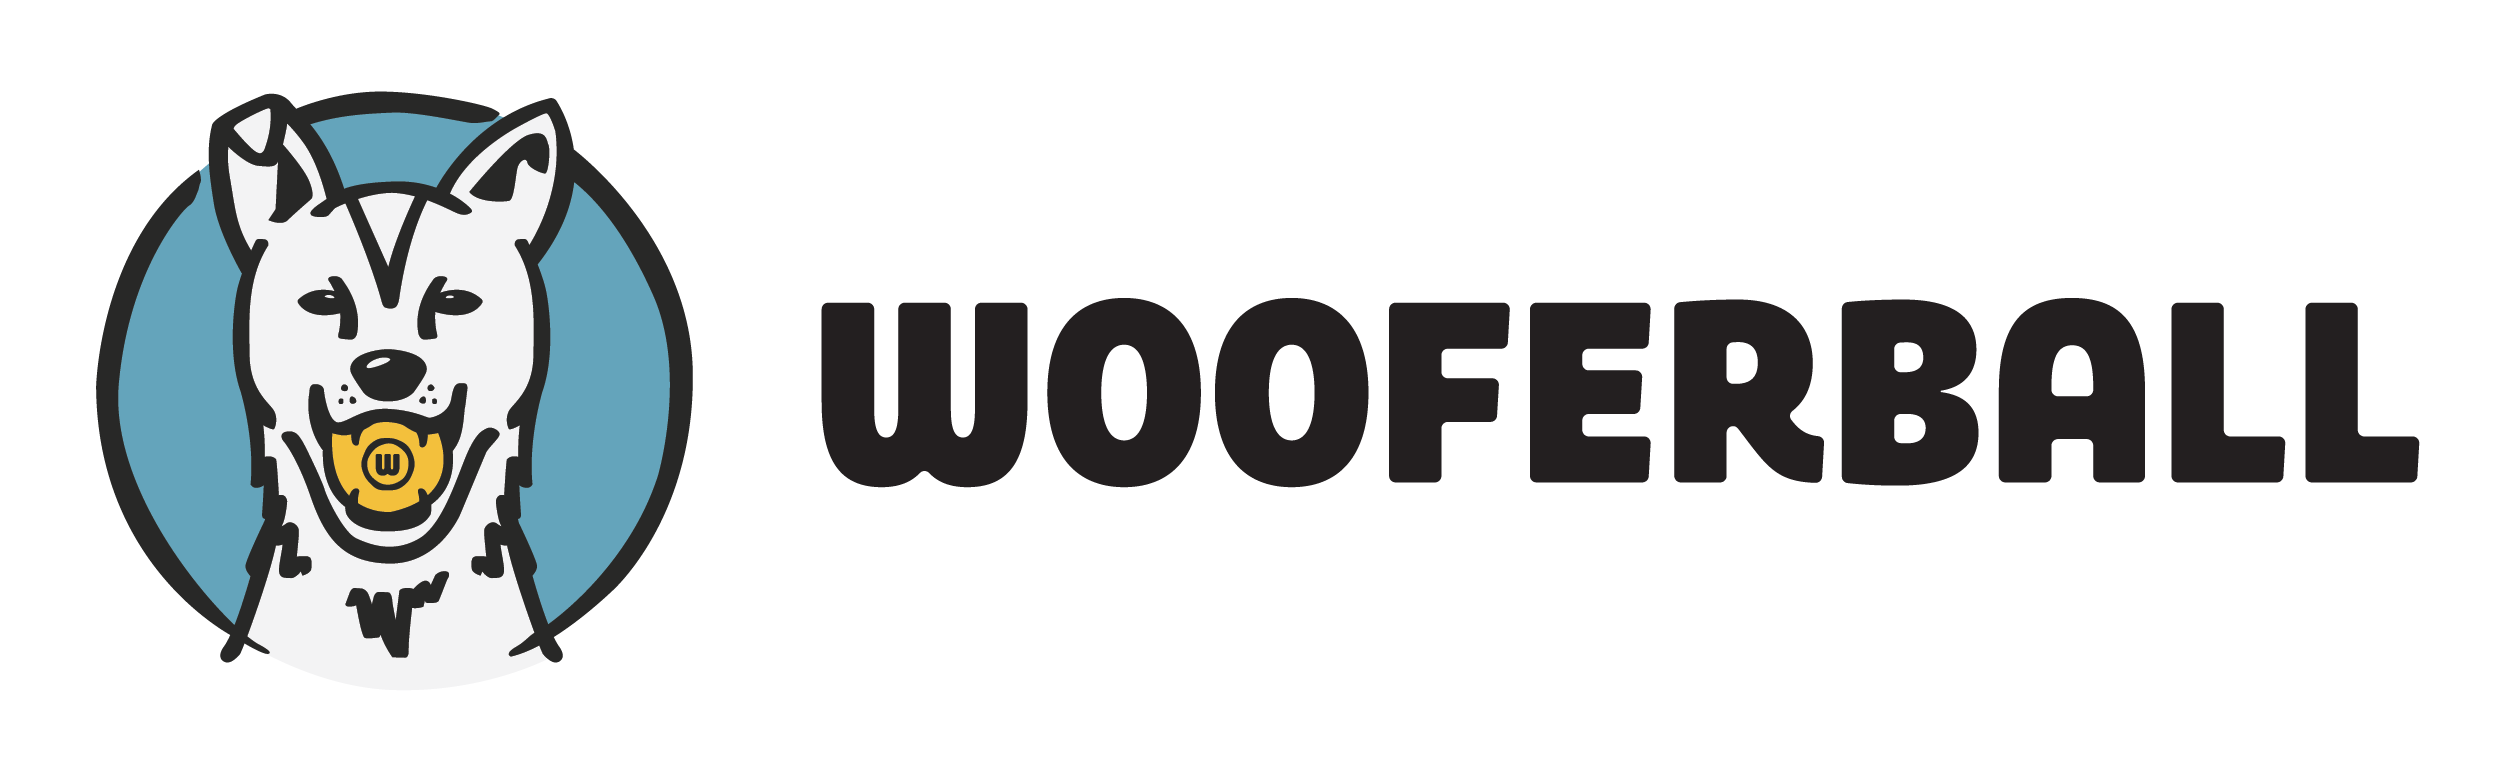 Wooferball